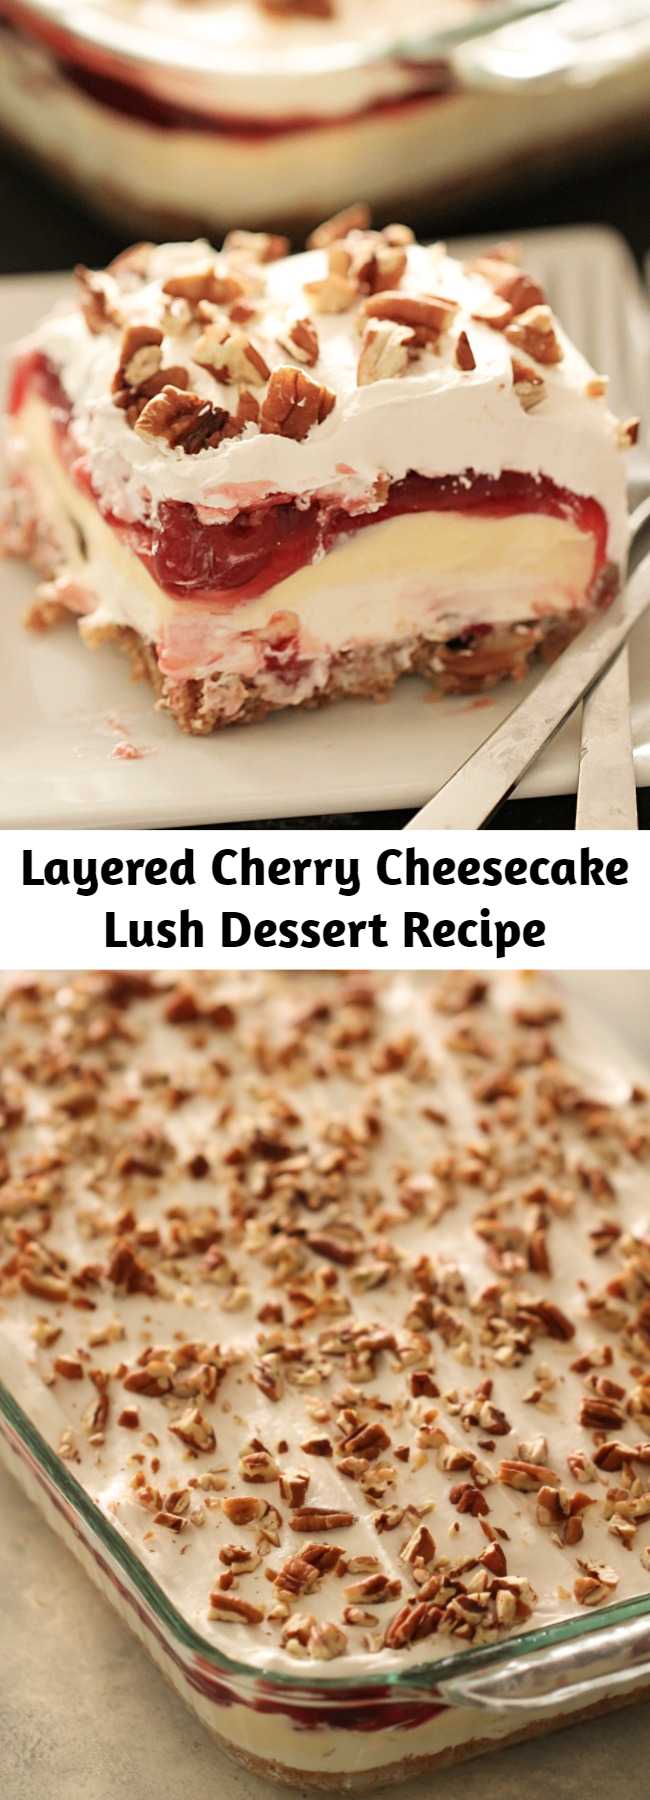 Layered Cherry Cheesecake Lush Dessert Recipe - Get ready to enjoy the best, cherry cream cheese lush dessert you have ever tasted. This mind-blowing layered cherry cheesecake will have you coming back for more and friends asking for the recipe!